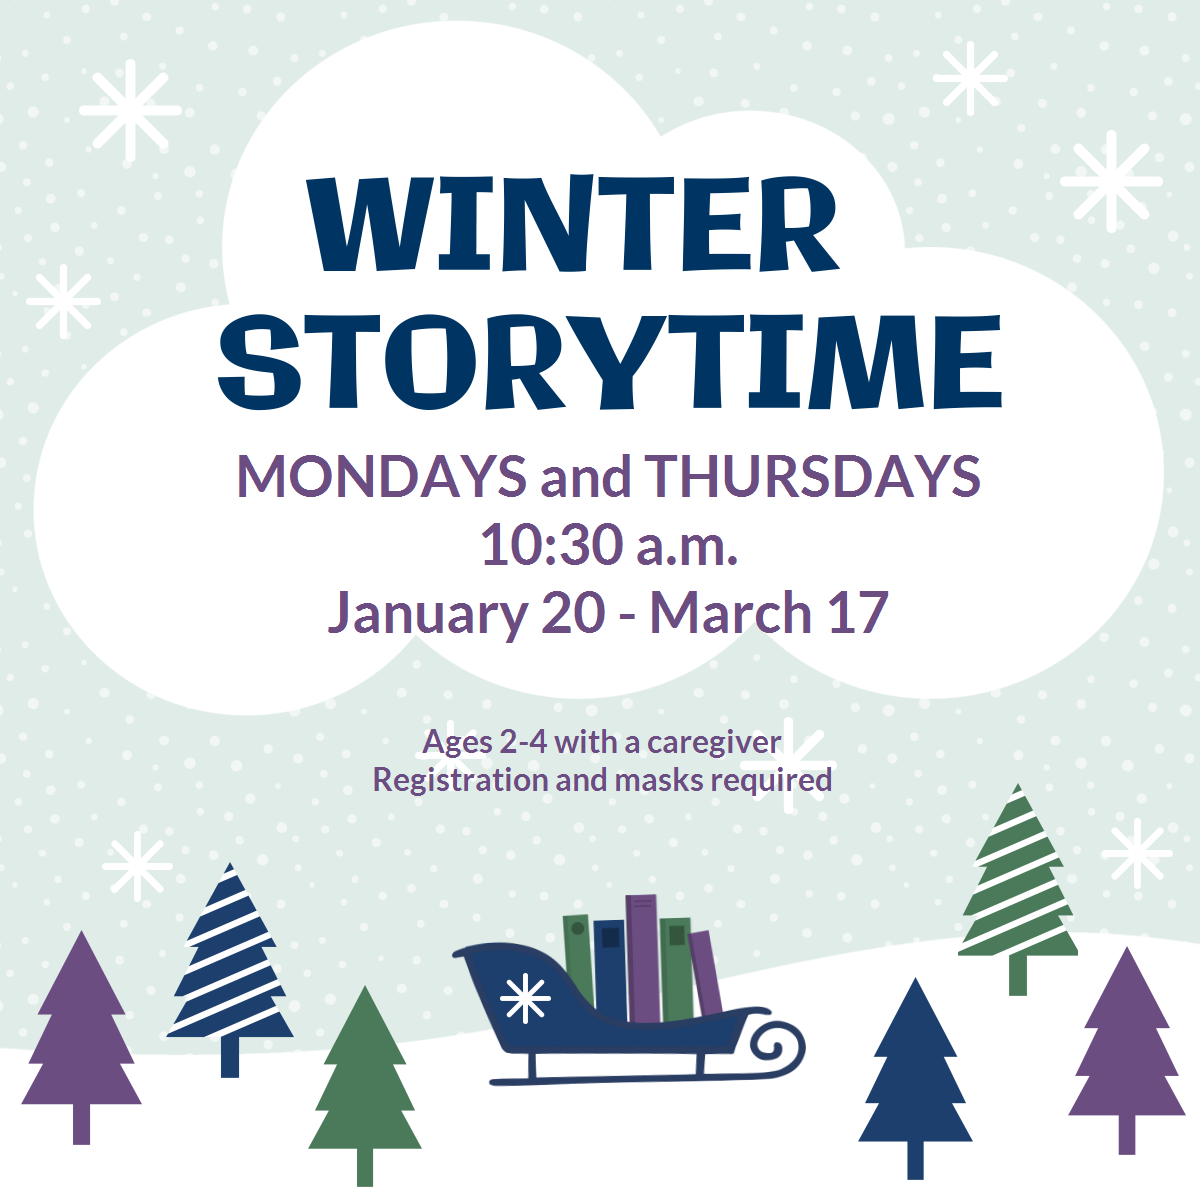 Winter Storytime Mondays and Thursdays at 10:30am January 20-March 17